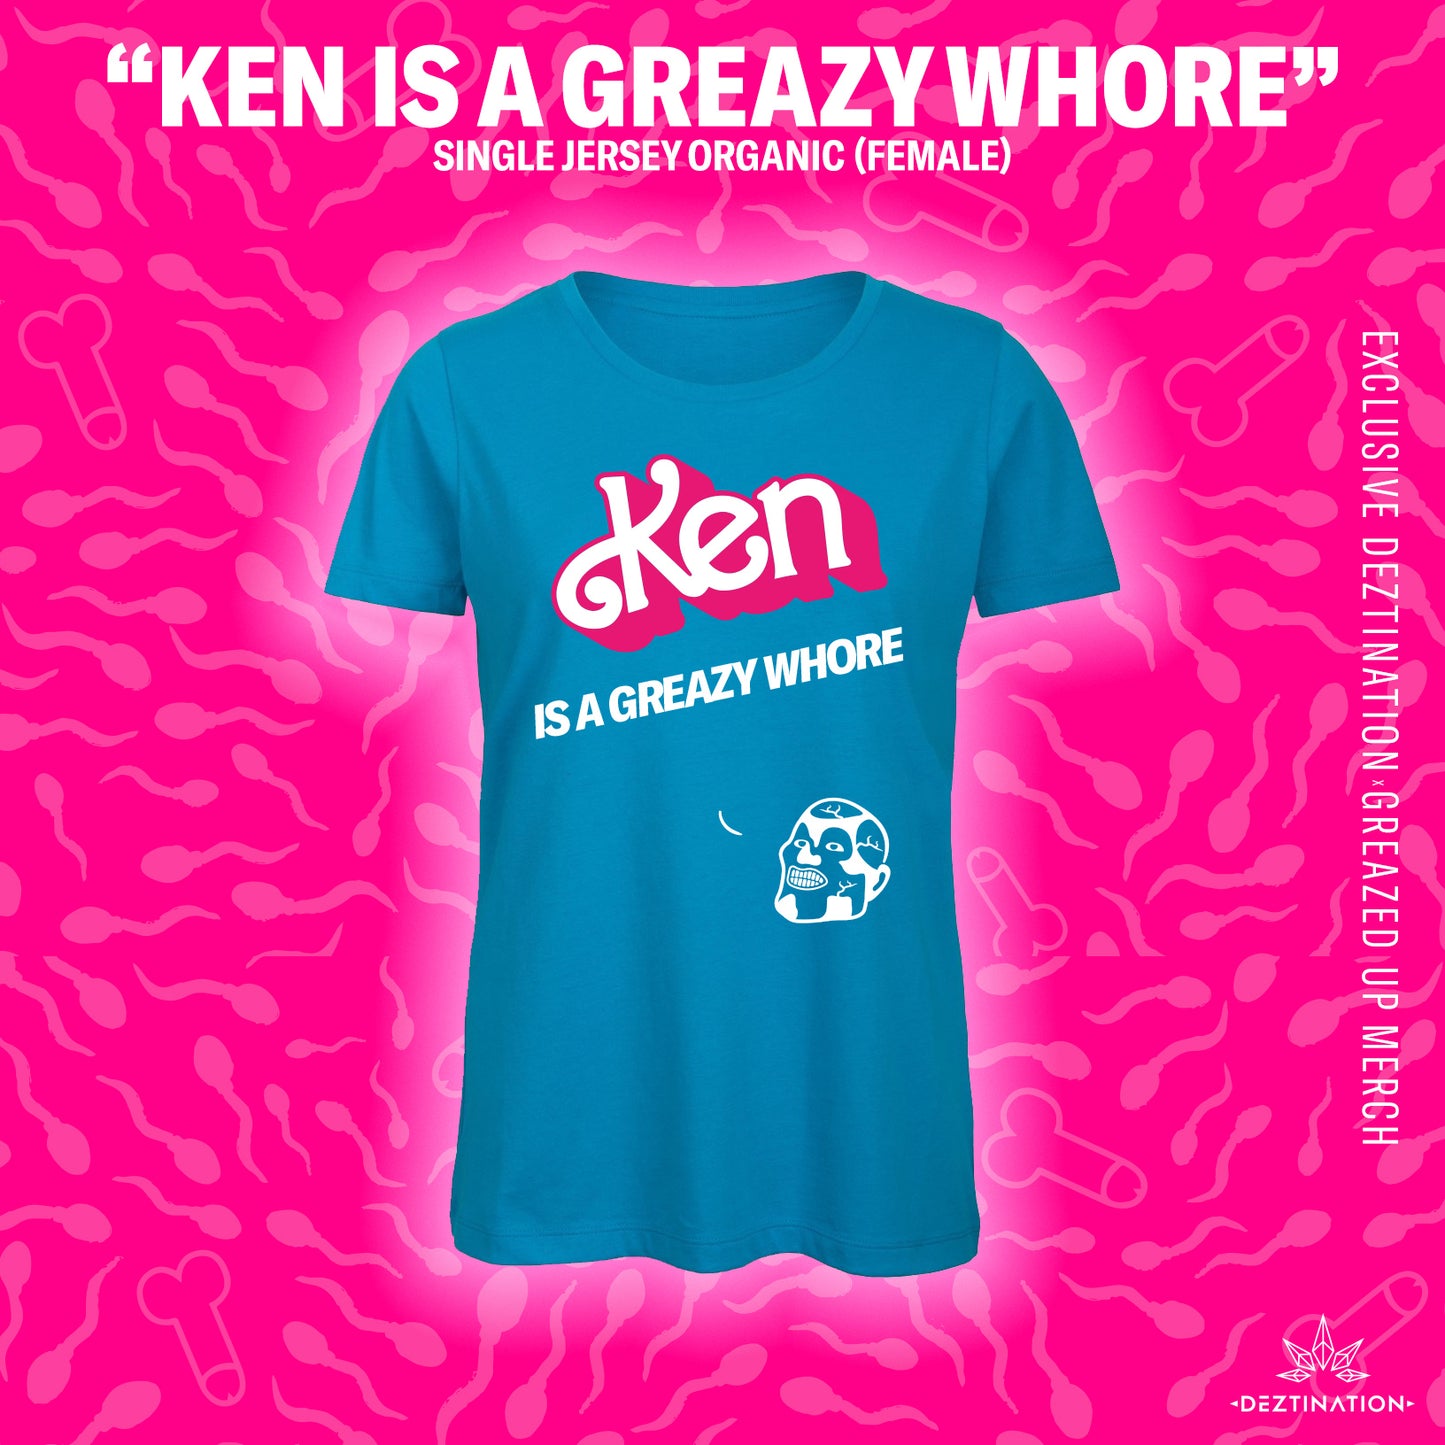 Ken is a Greazy whore t-shirt (female)